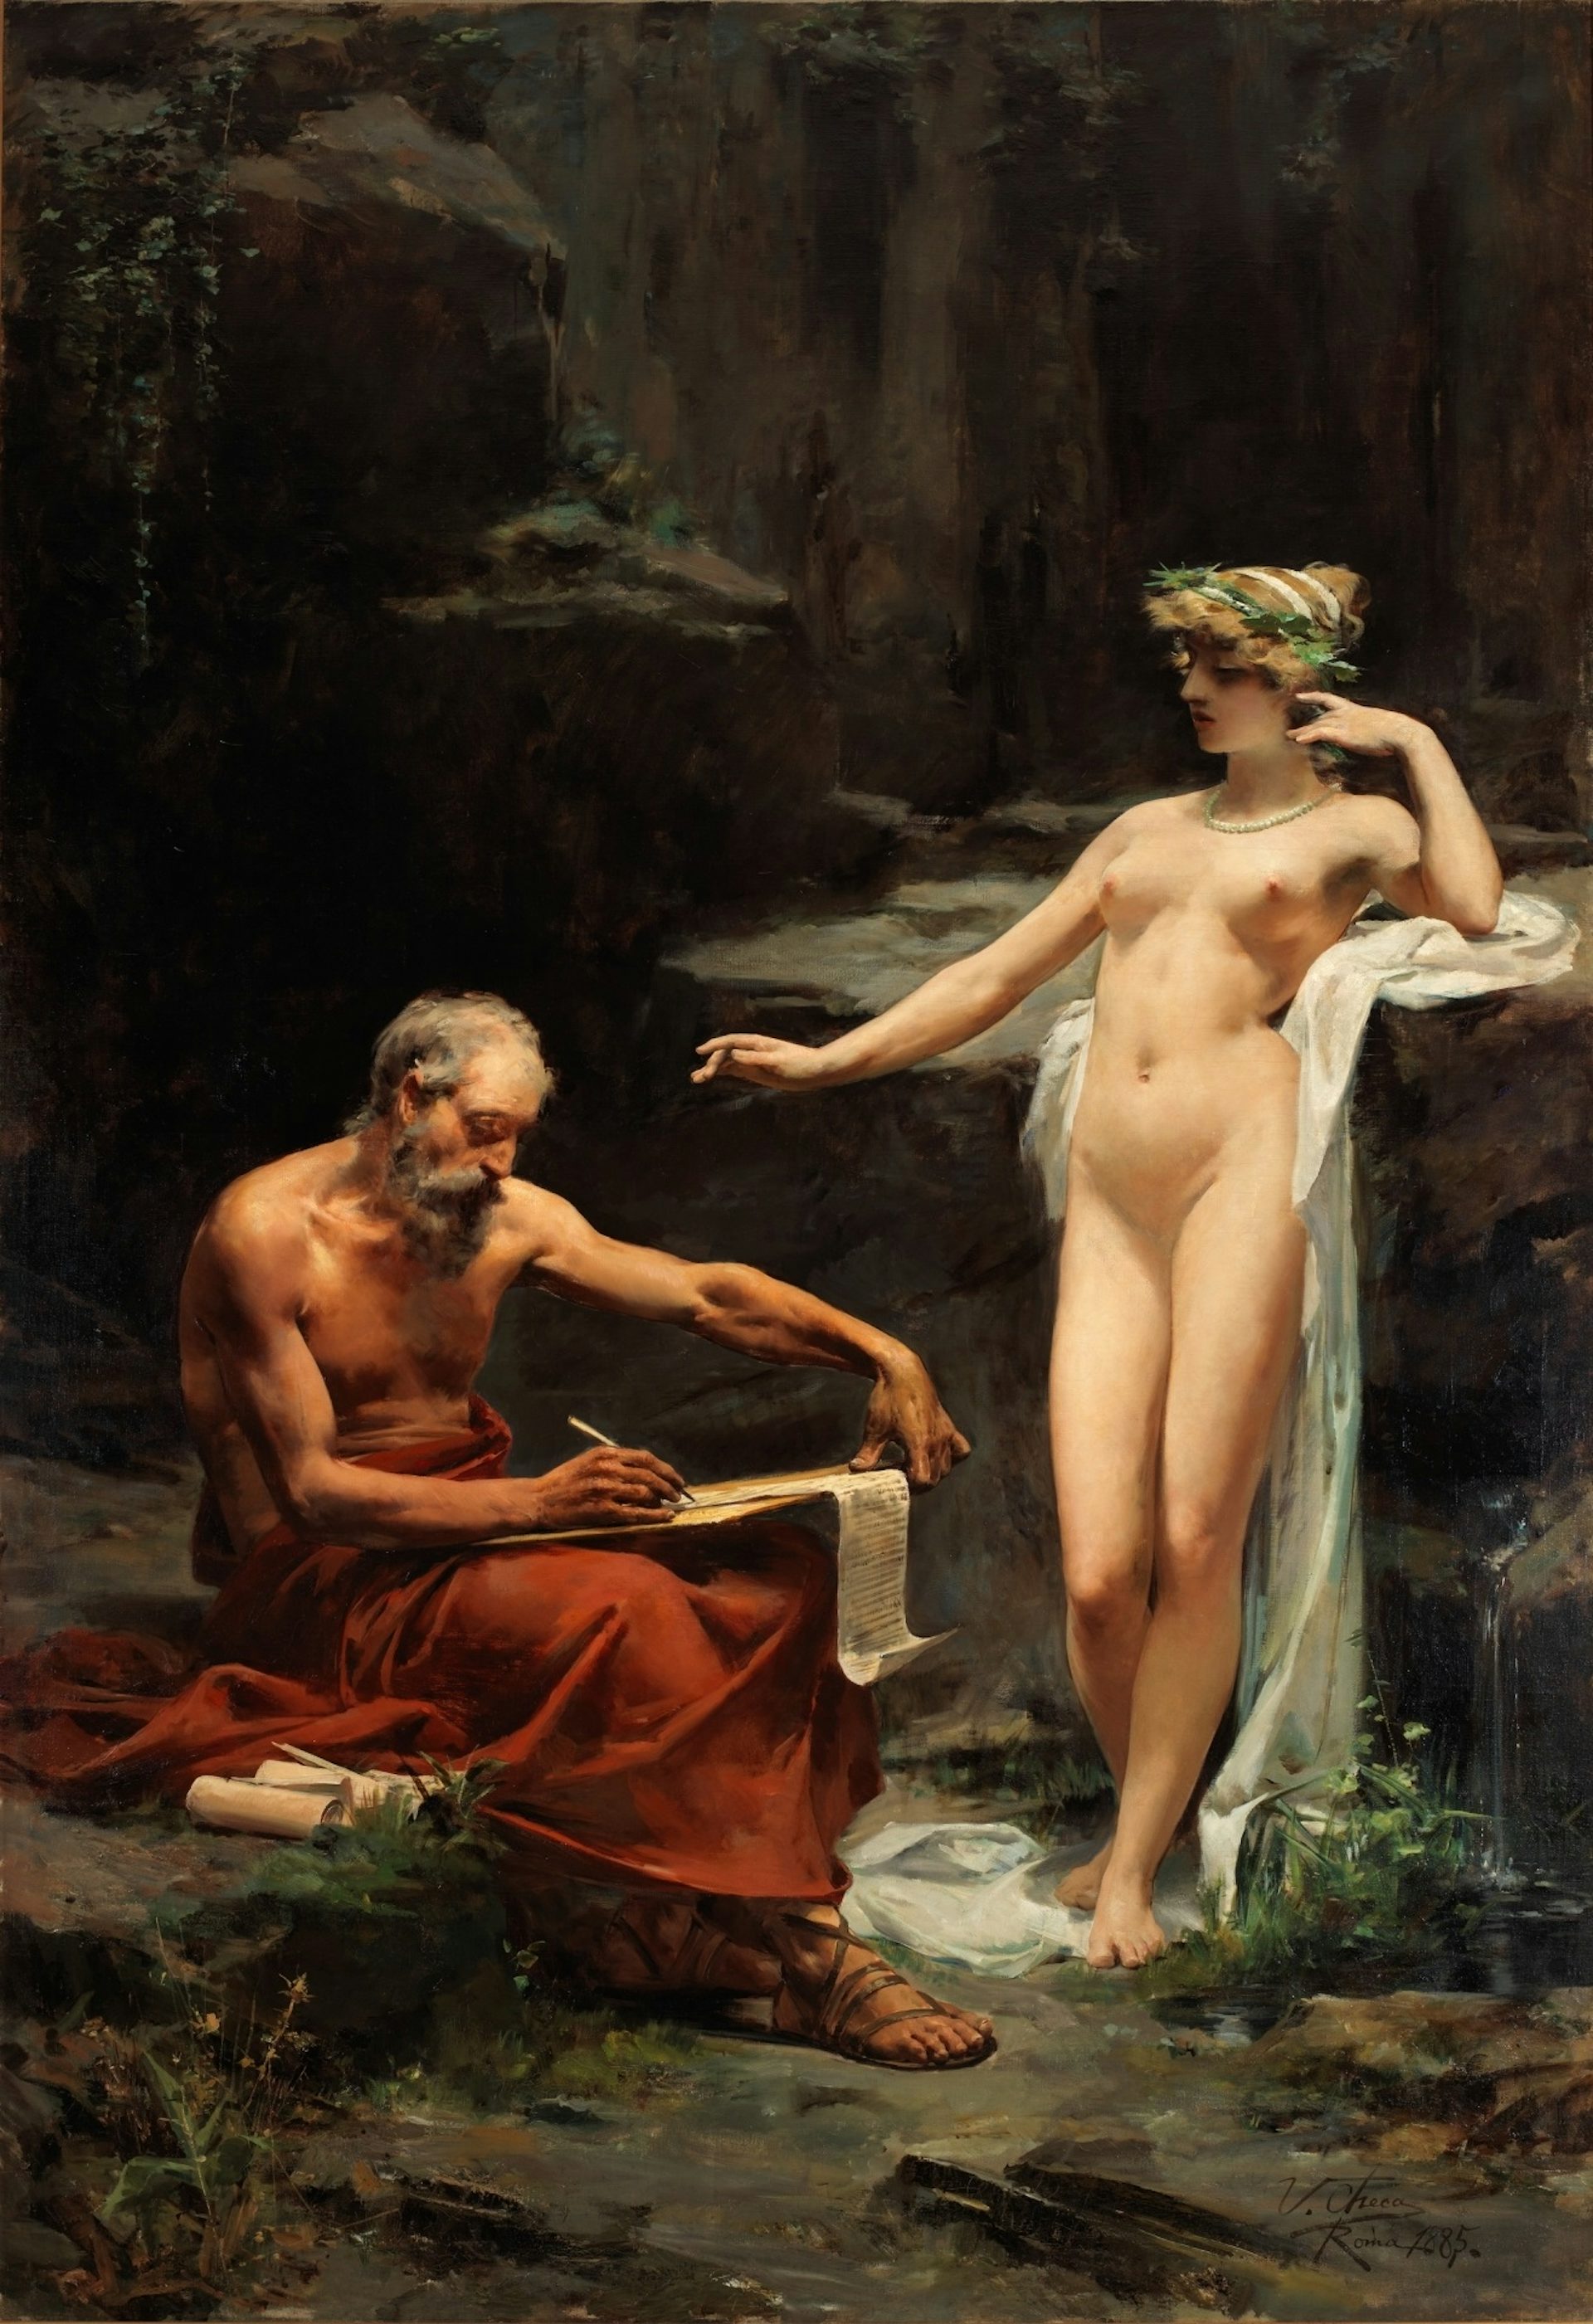 The Nymph Egeria Dictating the Laws of Rome to Numa Pompilius by Ulpiano Checa